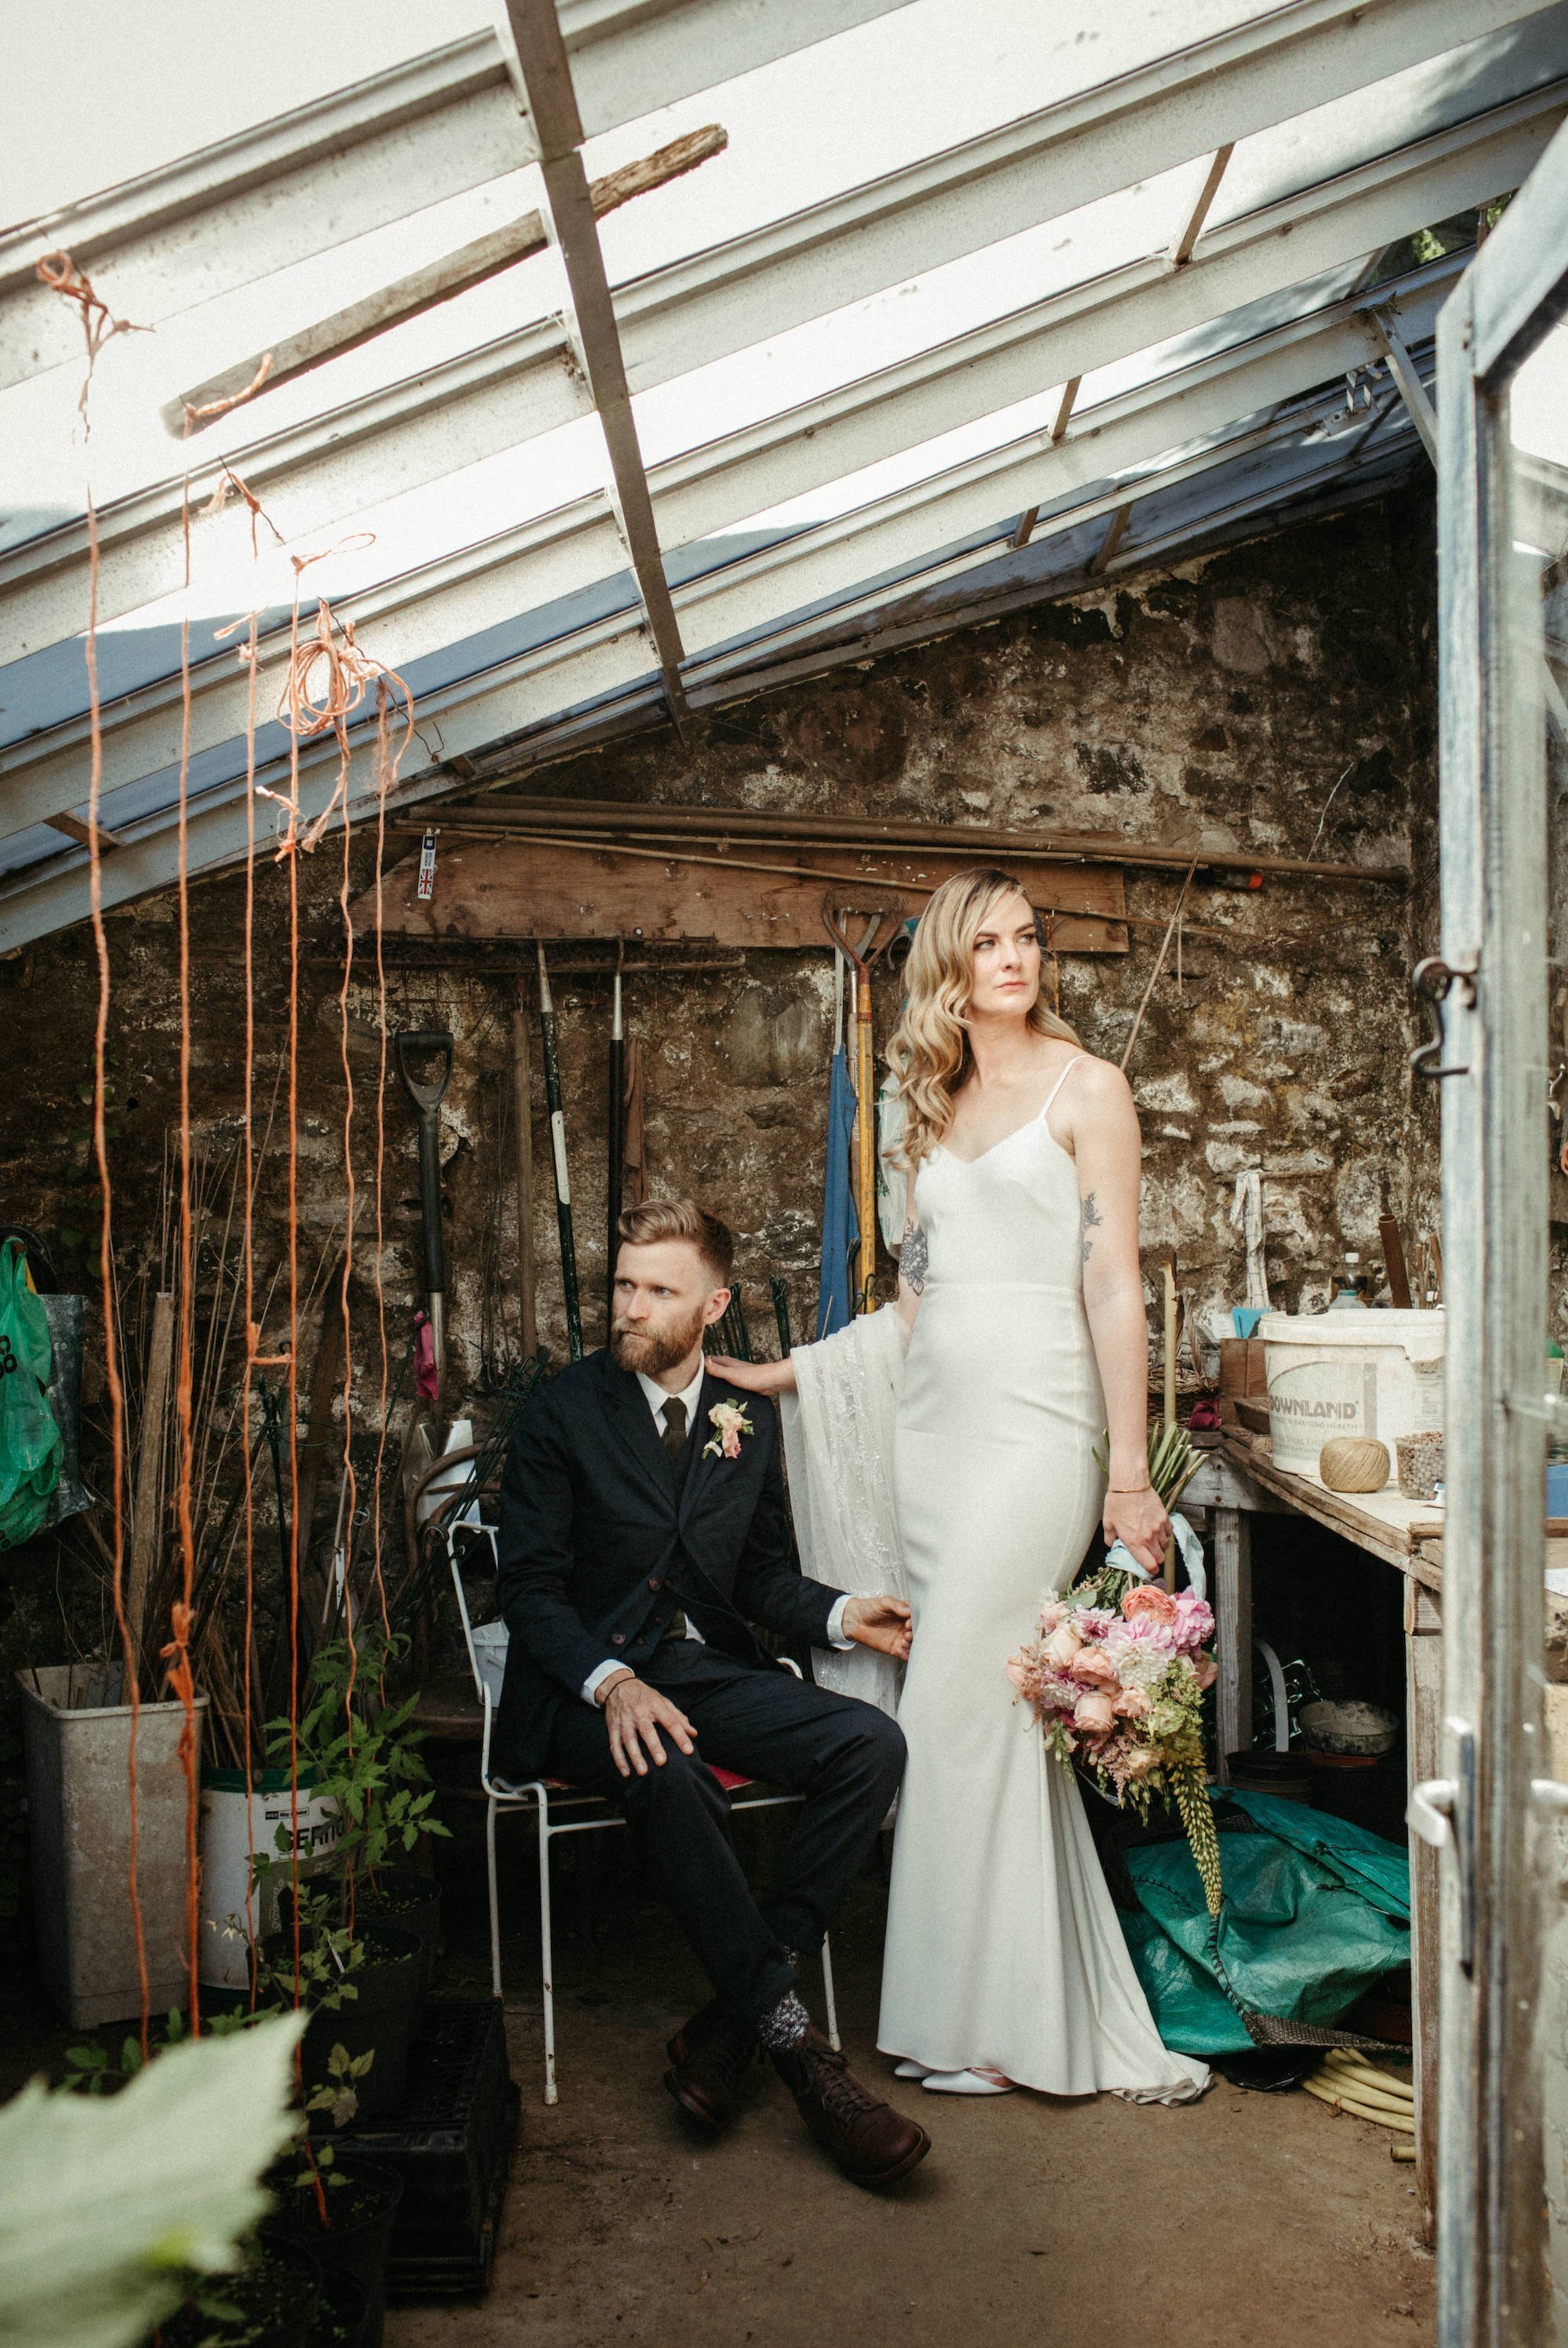 Beautiful bride Sharon wore the Victor wedding dress by Halfpenny London